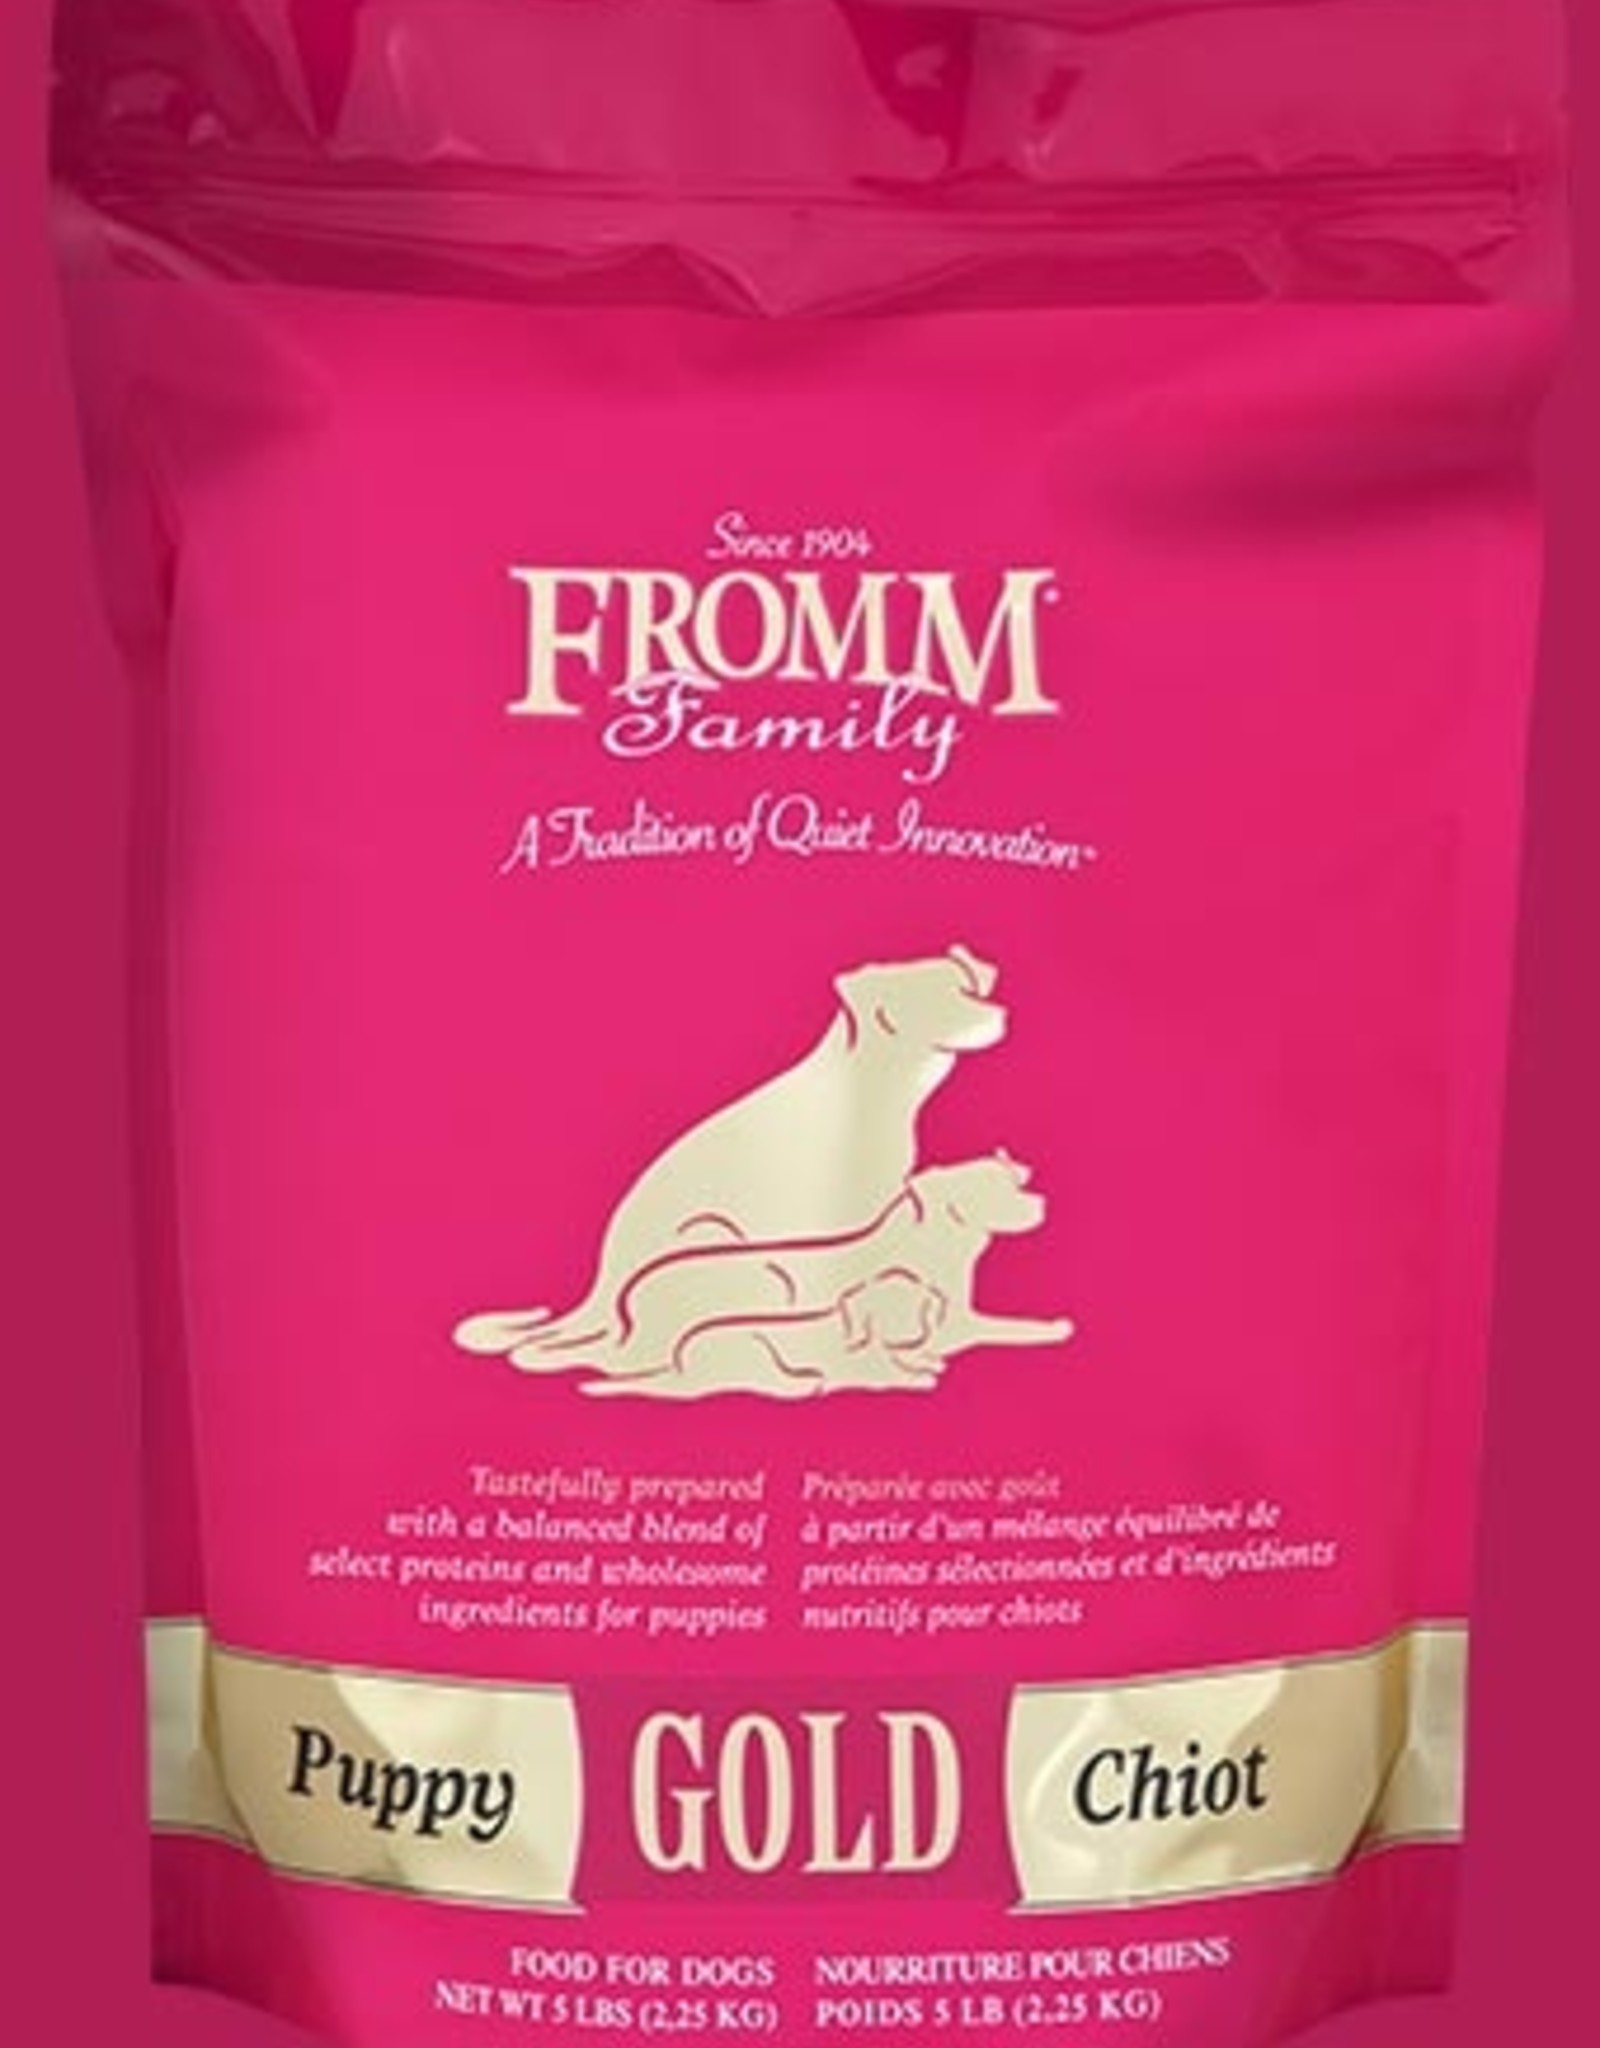 FROMM FAMILY FOODS LLC FROMM GOLD PUPPY 15LBS